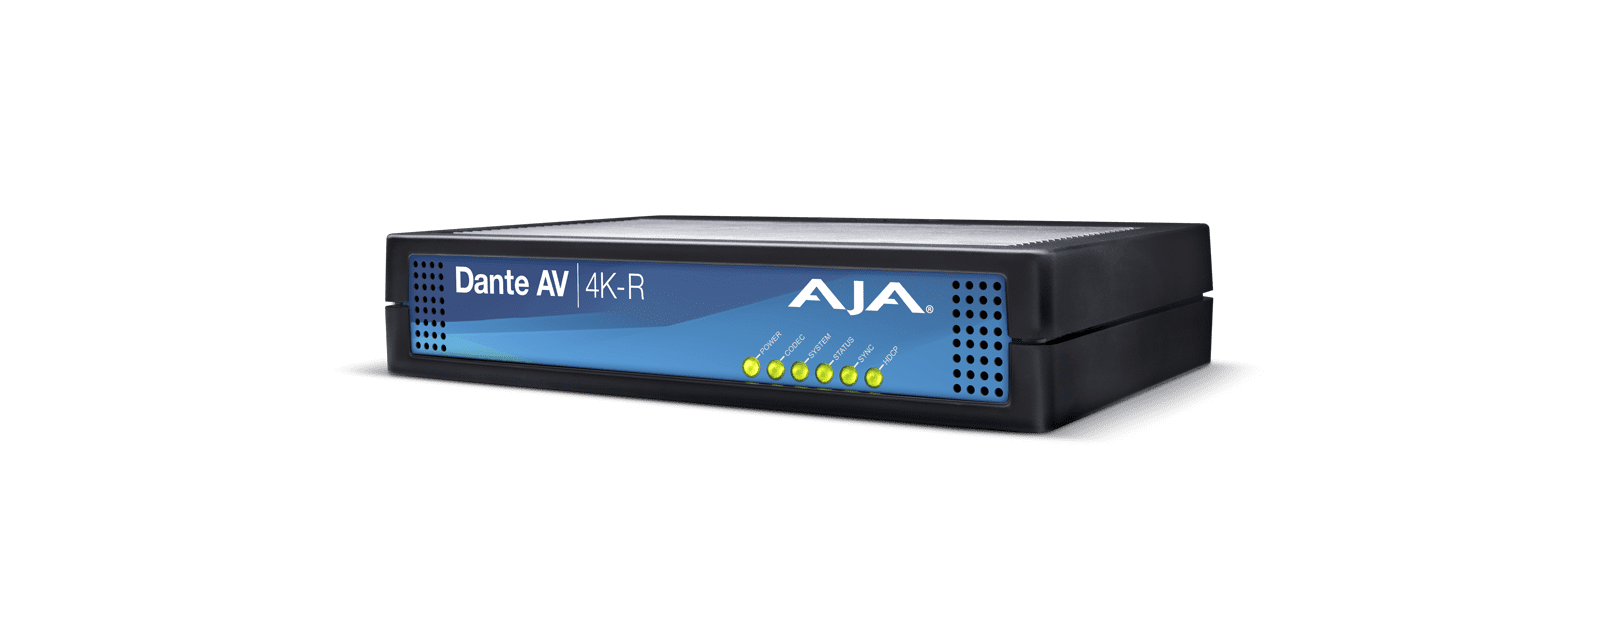 Dante AV continues strong growth with addition of industry heavyweights AJA and Marshall 